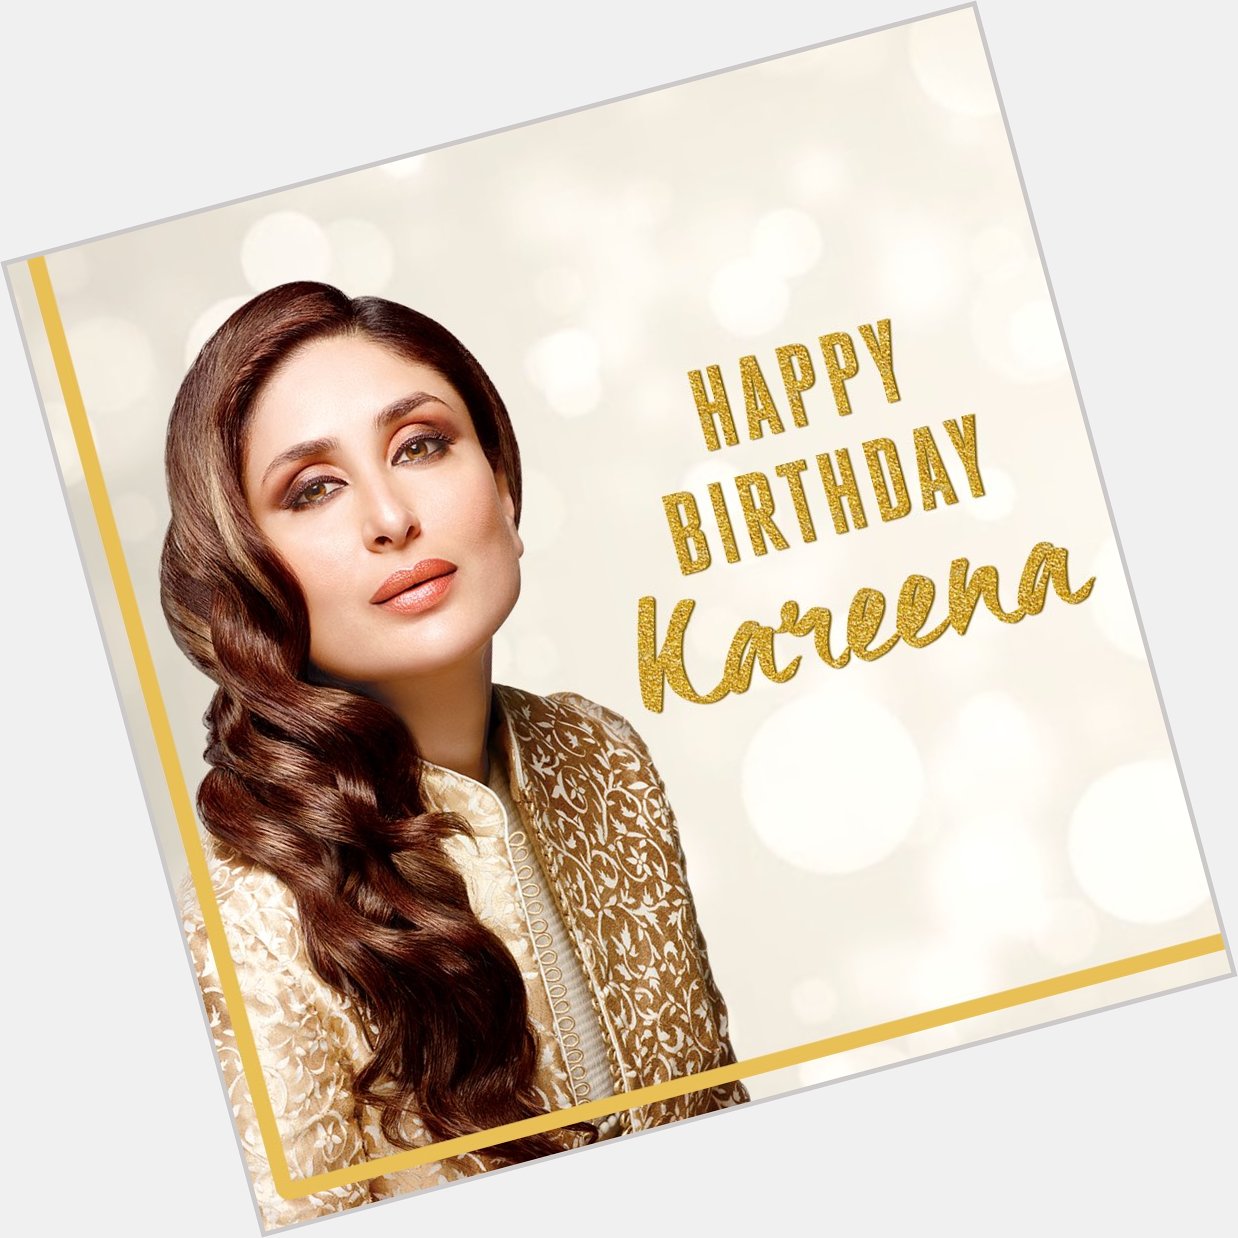 Wishing our favourite a very happy birthday!
Lots of love to you, Kareena Kapoor Khan  